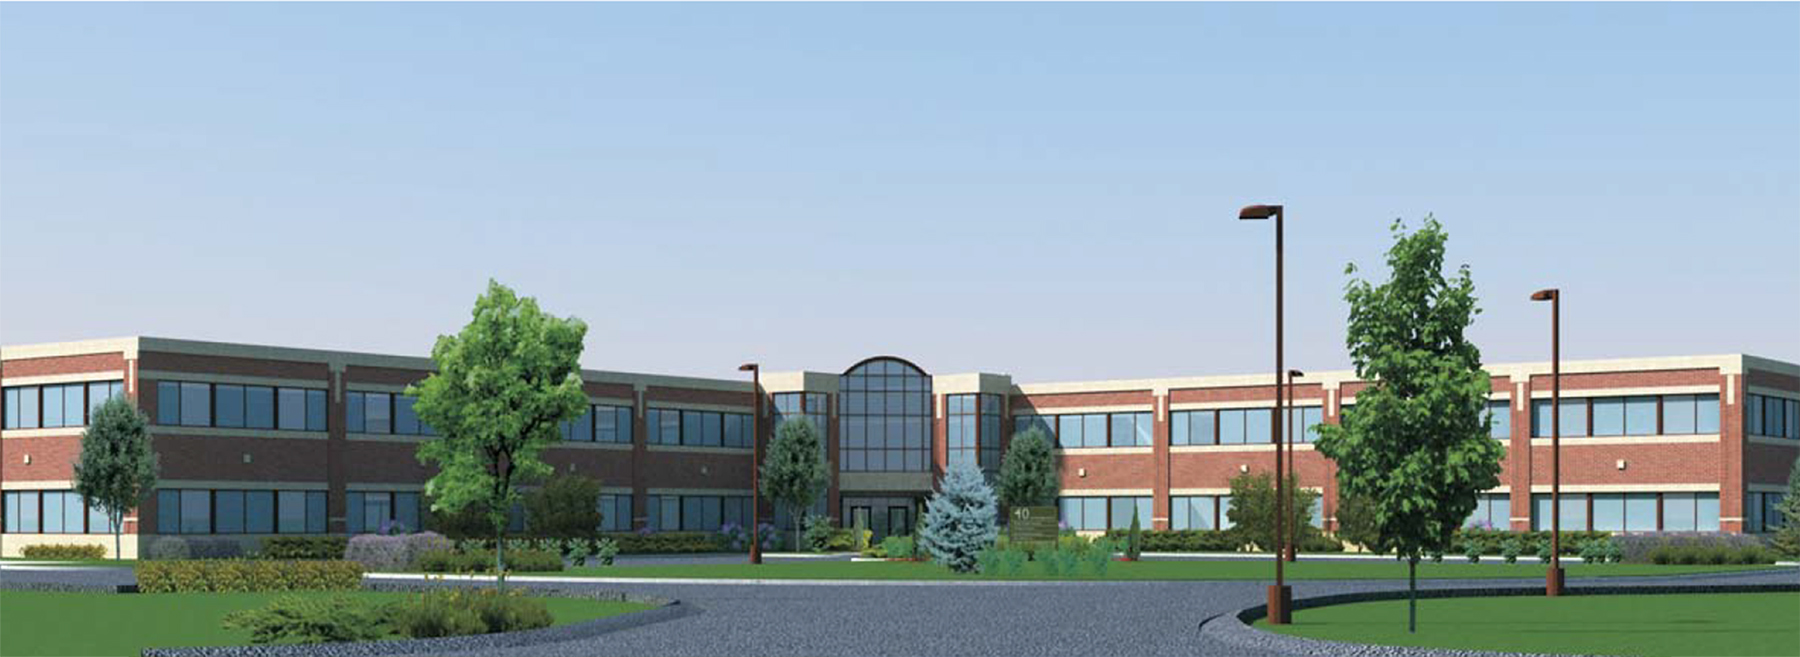 R2 Development Partners Malta NY - 40 State Farm Place Wide View